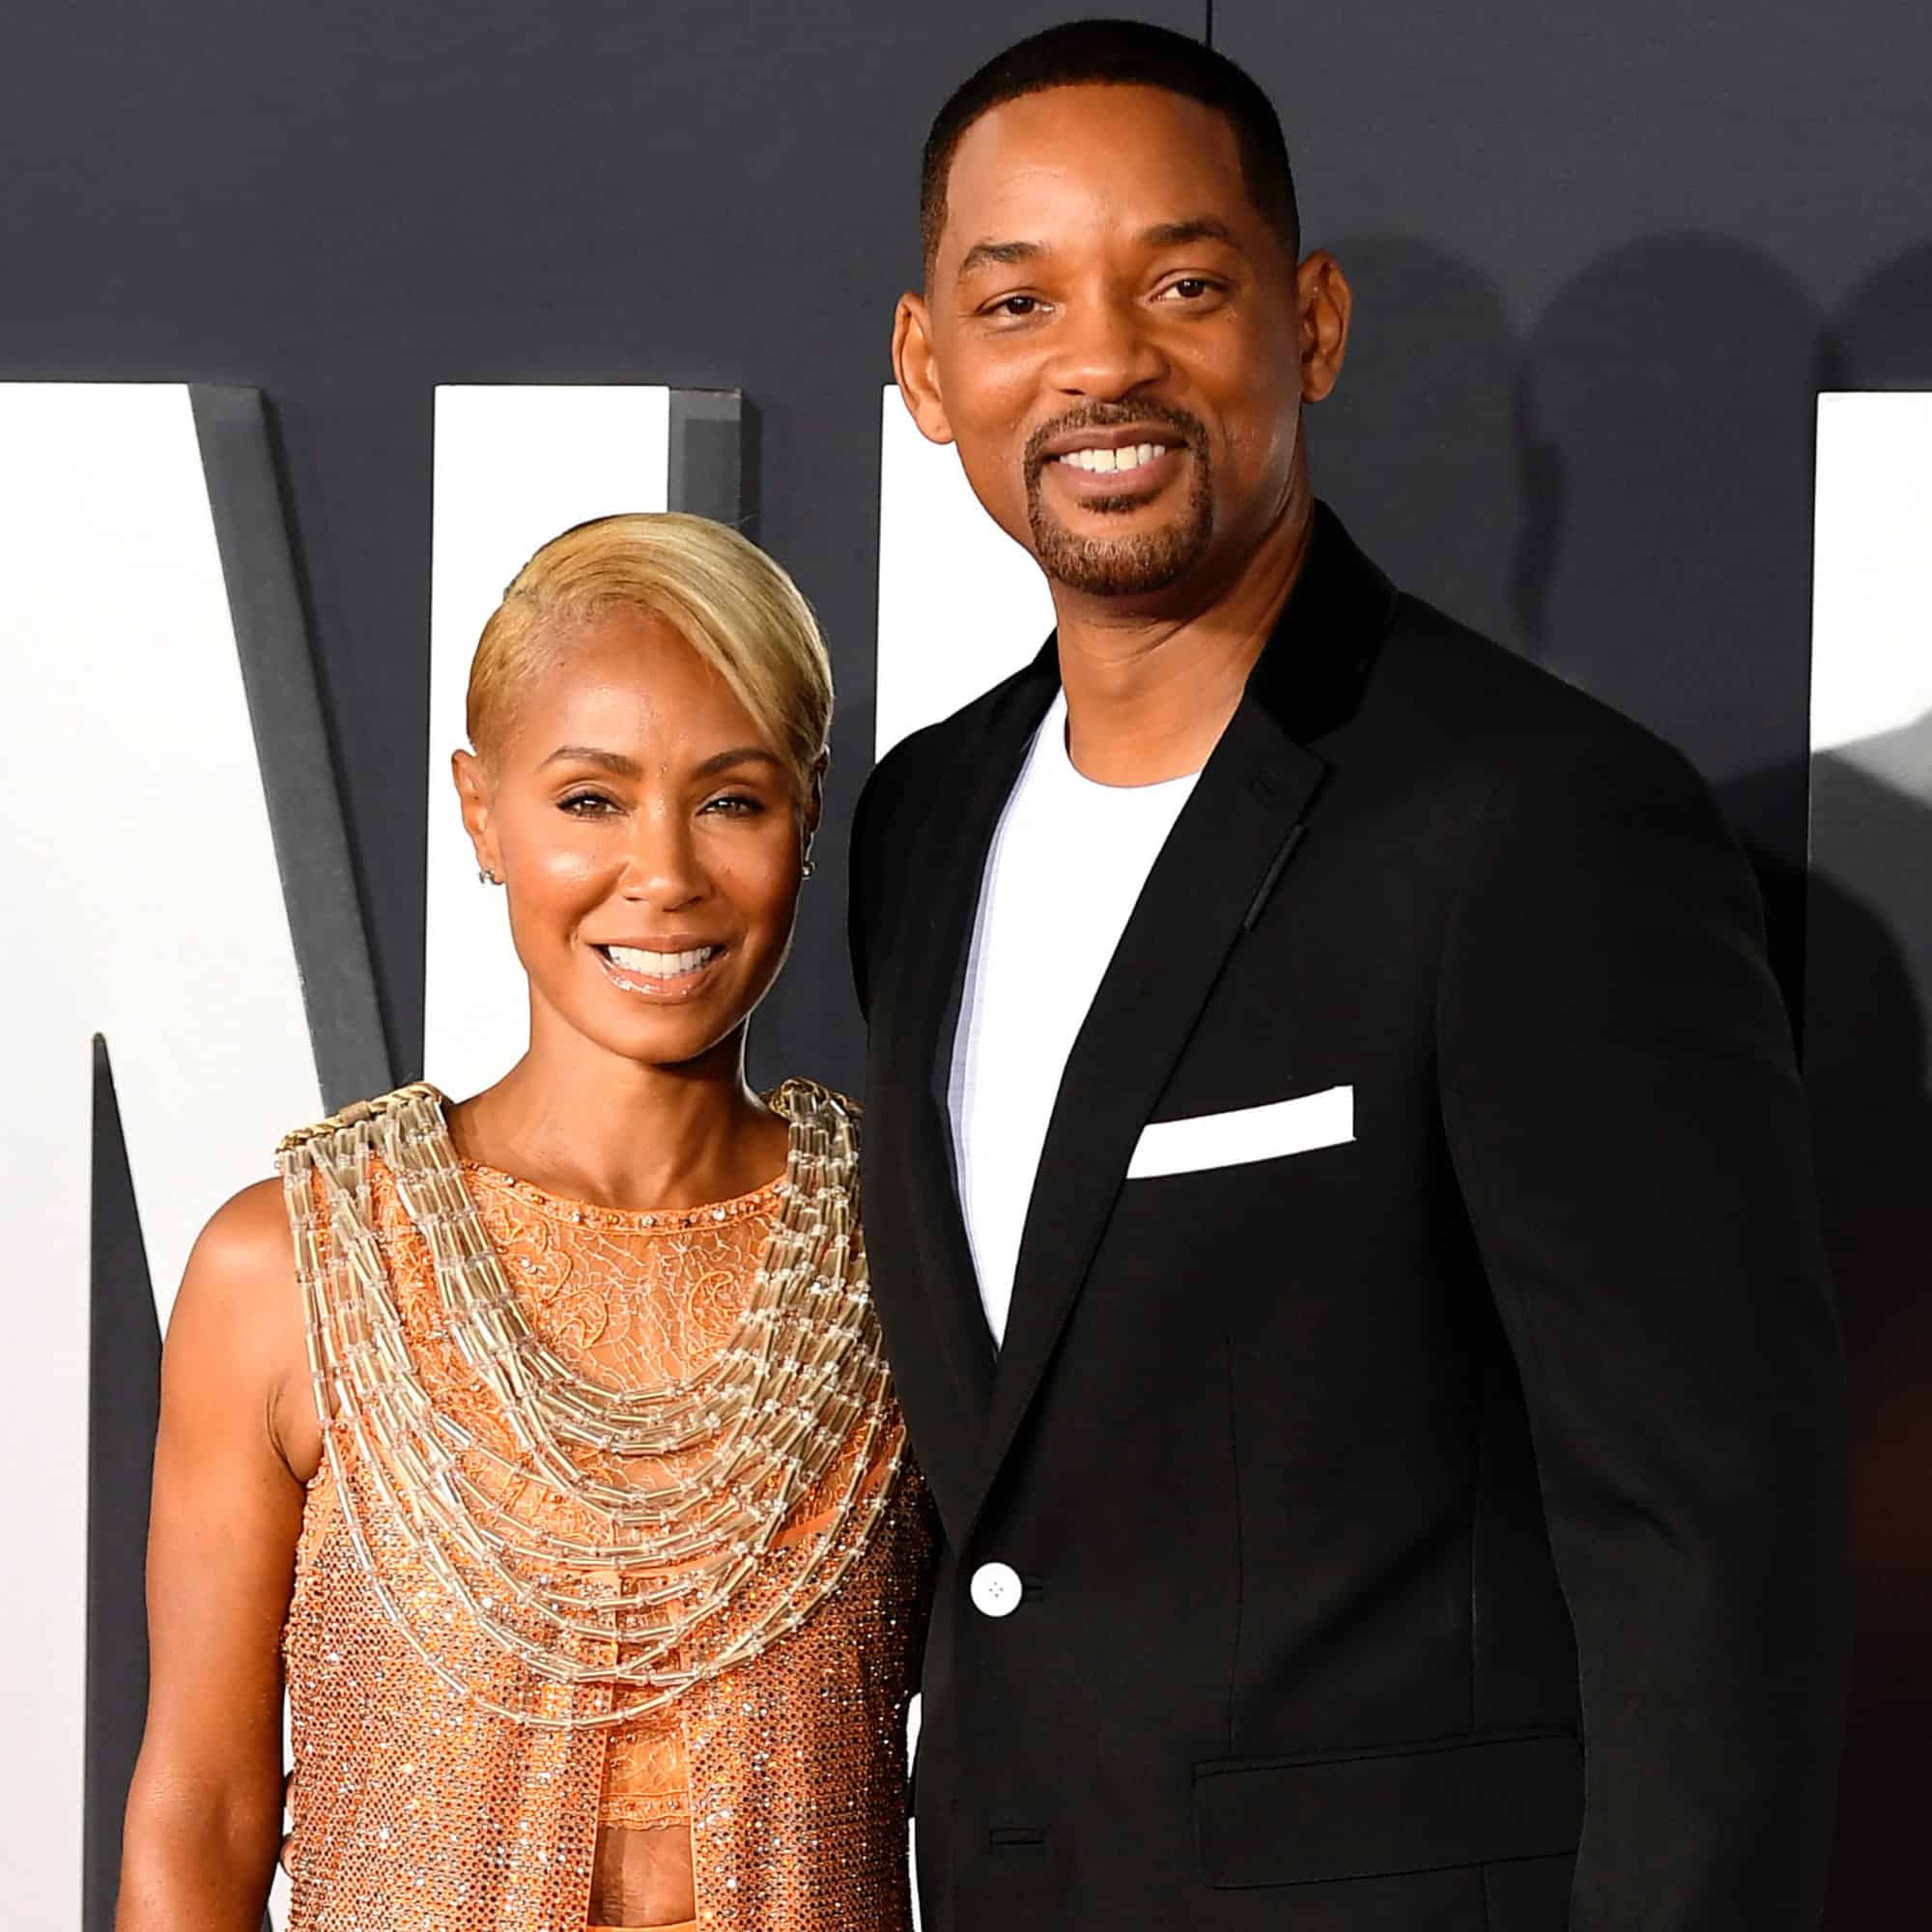 Will Smith Discusses His “Unconventional Relationship” With Jada Pinkett-Smith–“Marriage For Us Can’t Be A Prison”